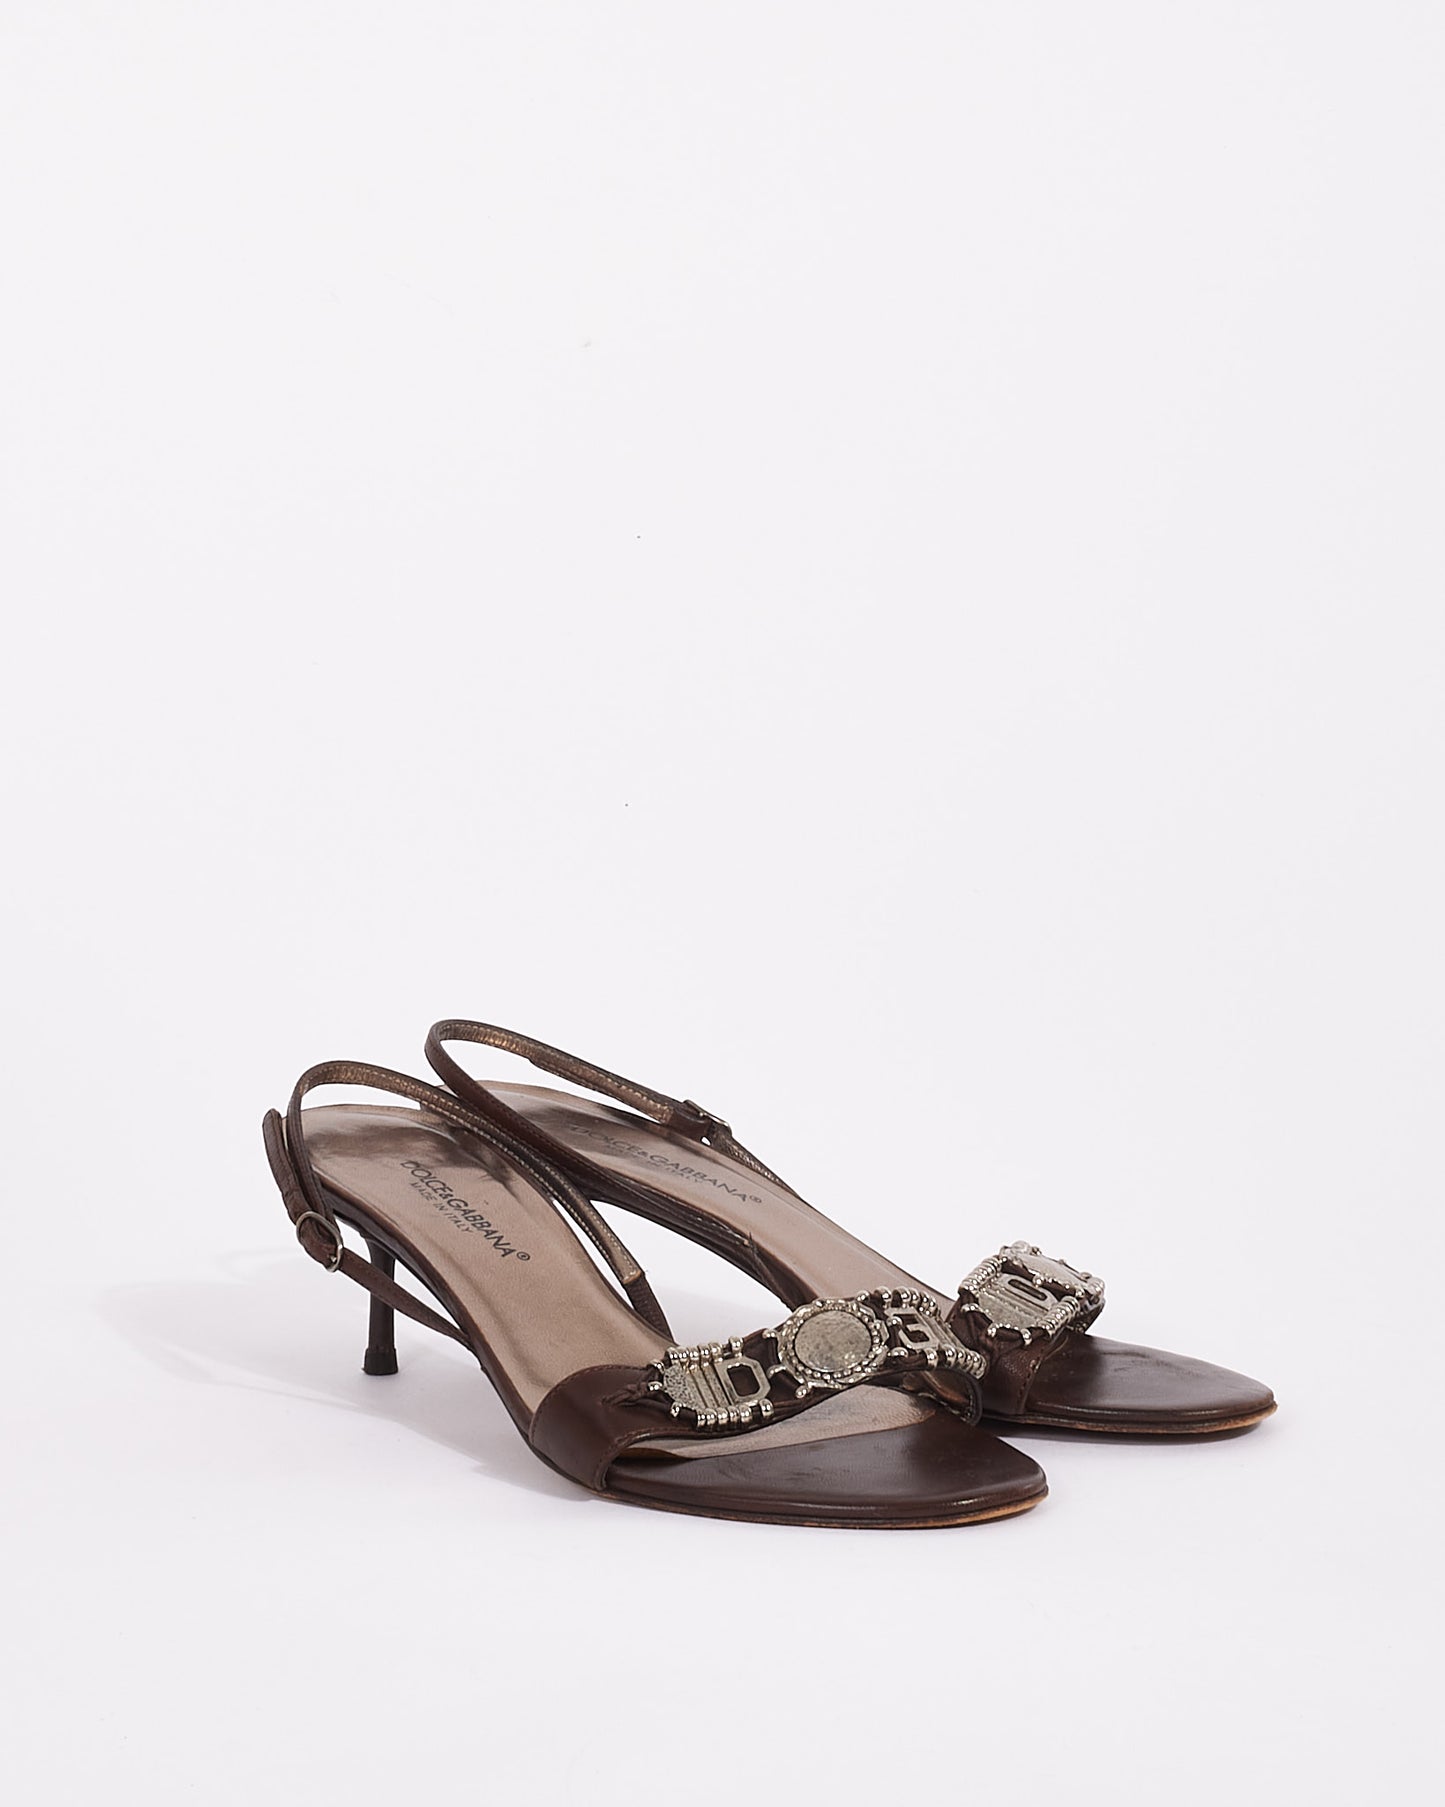 Dolce & Gabbana Brown Leather Heeled Sandals - 37